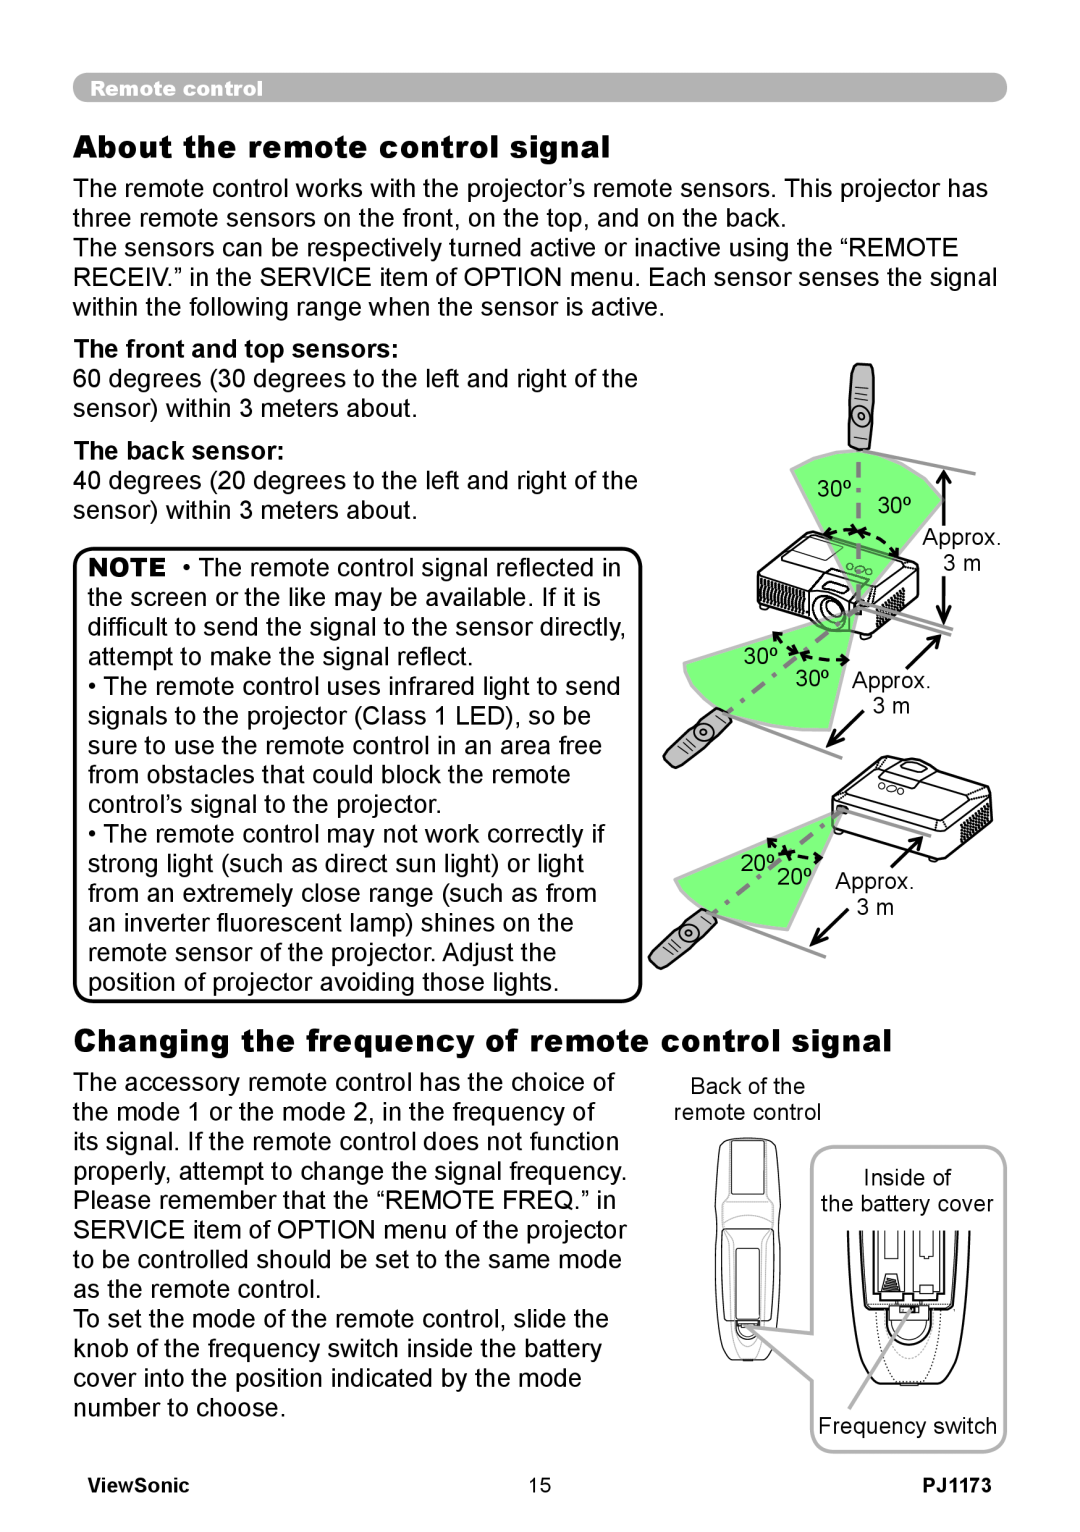 ViewSonic VS12109 About the remote control signal, Changing the frequency of remote control signal, The back sensor 